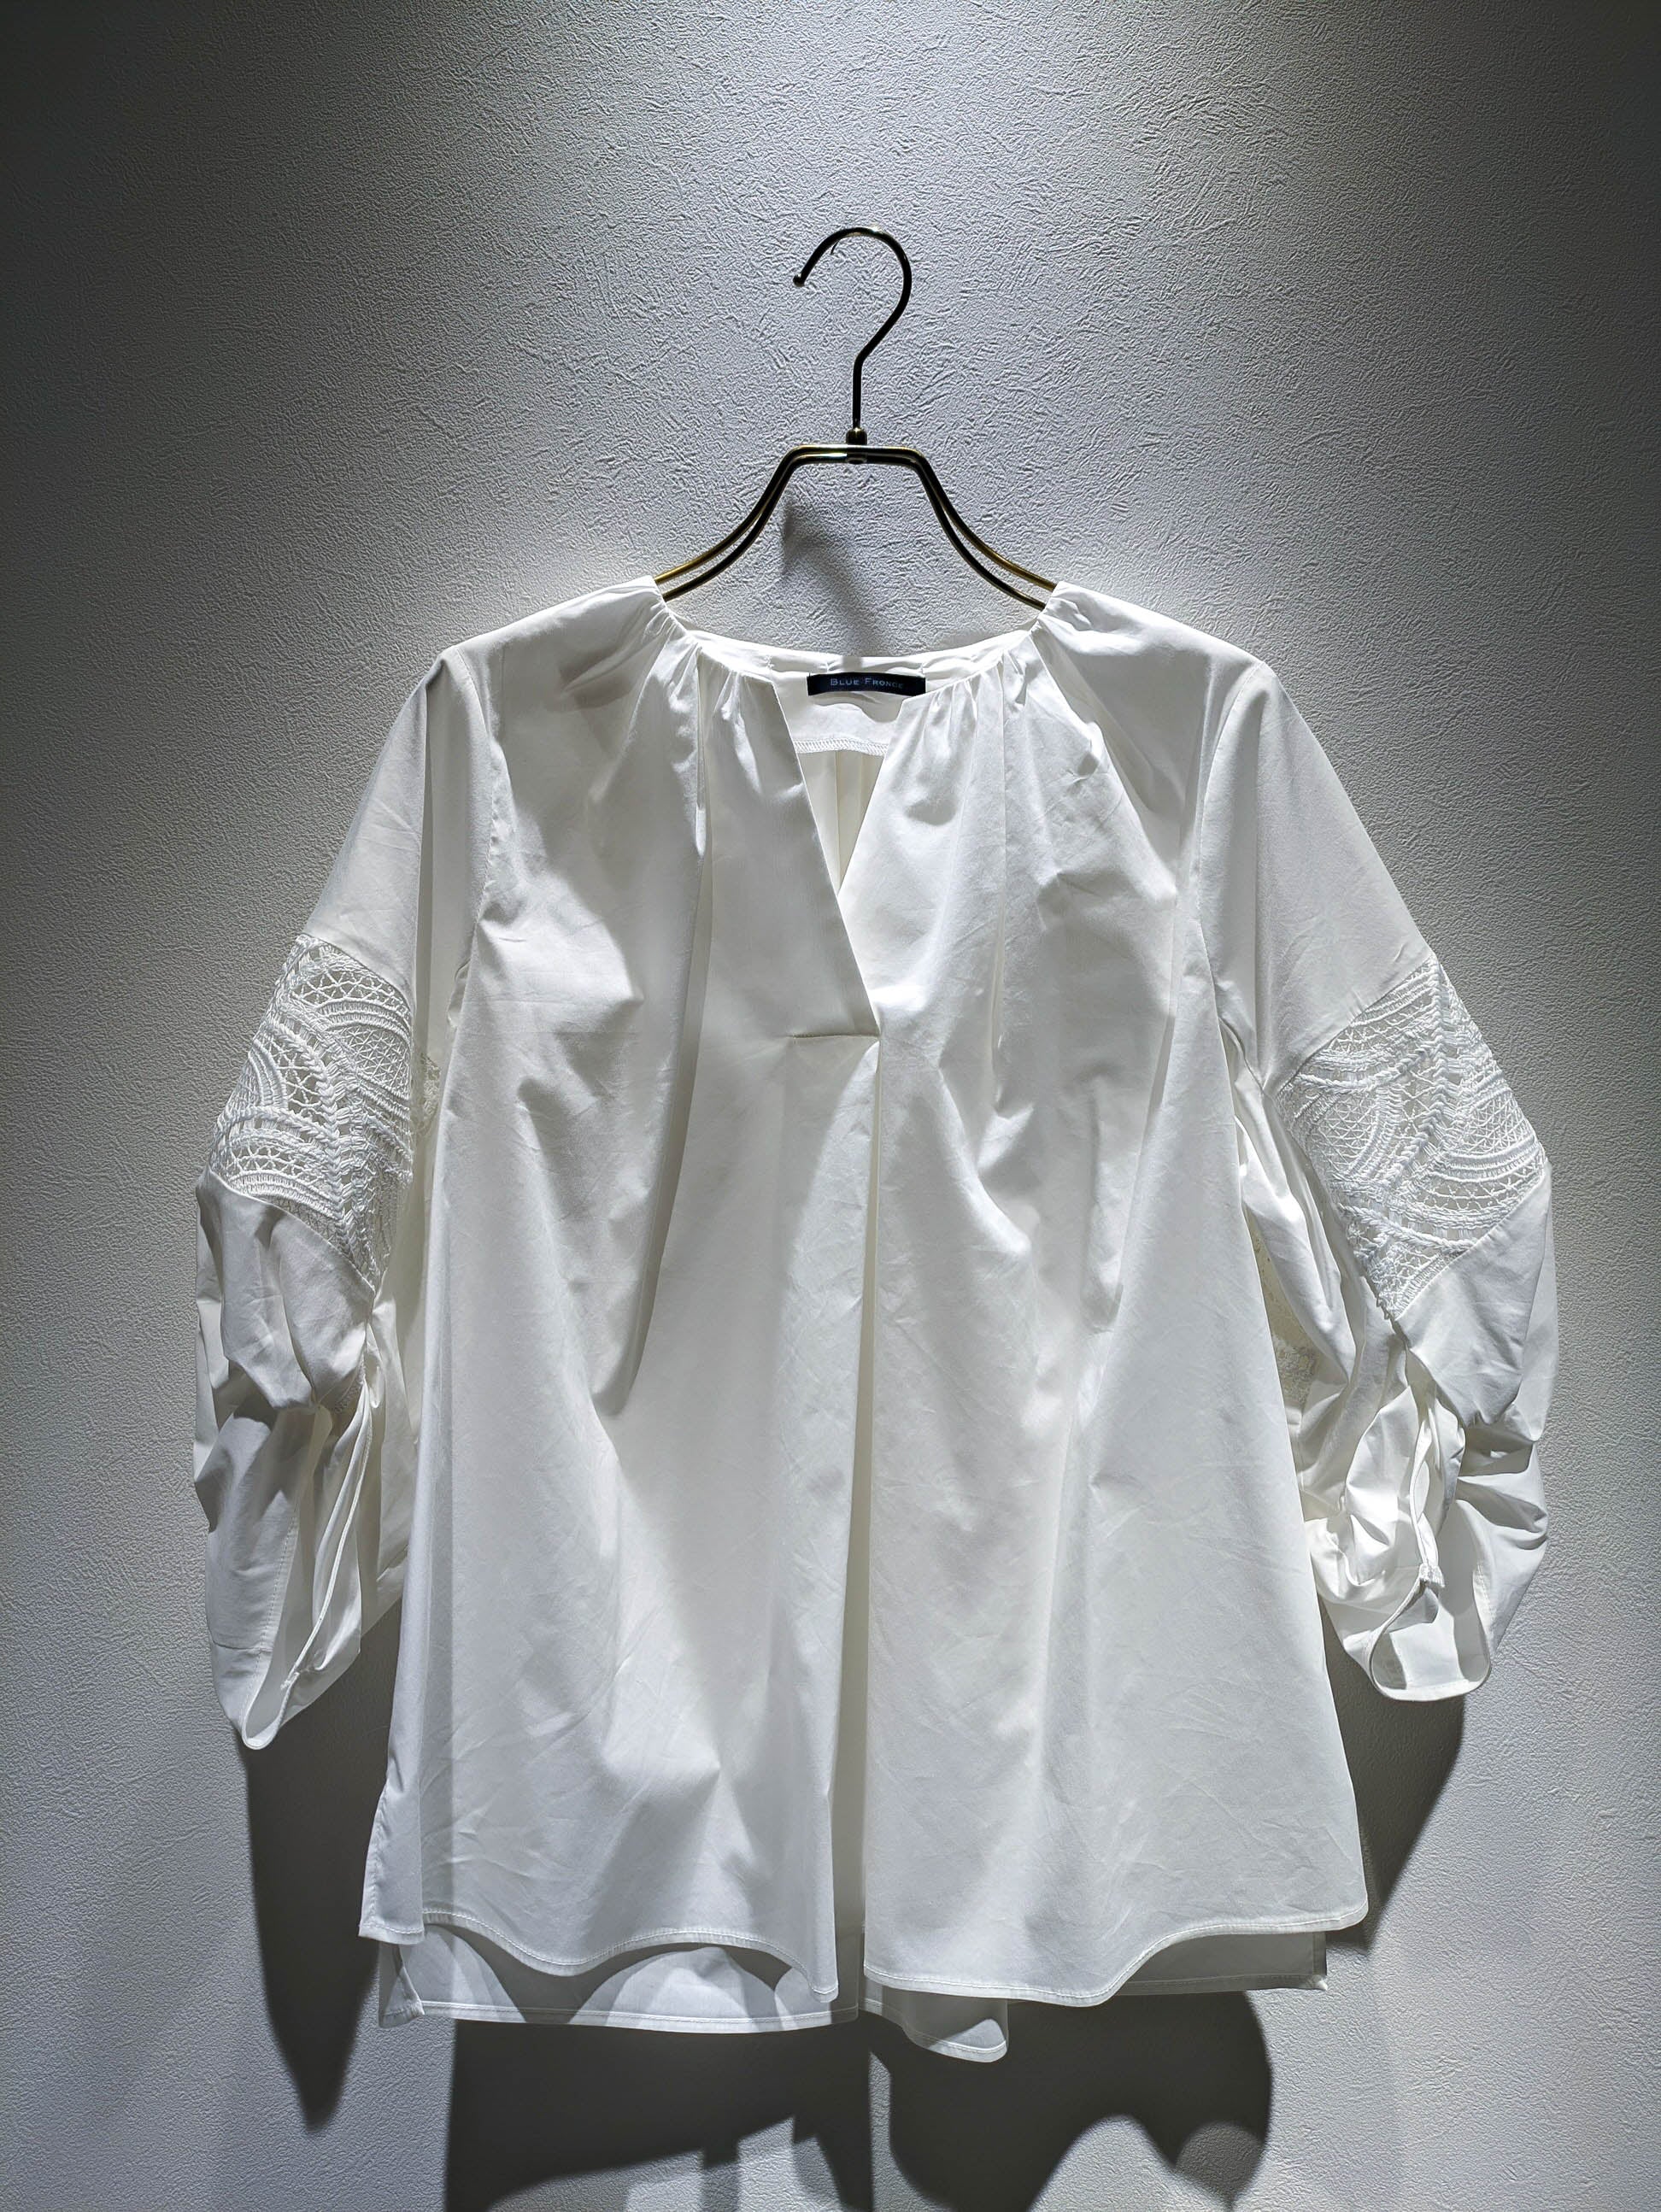 Skipper blouse with lace